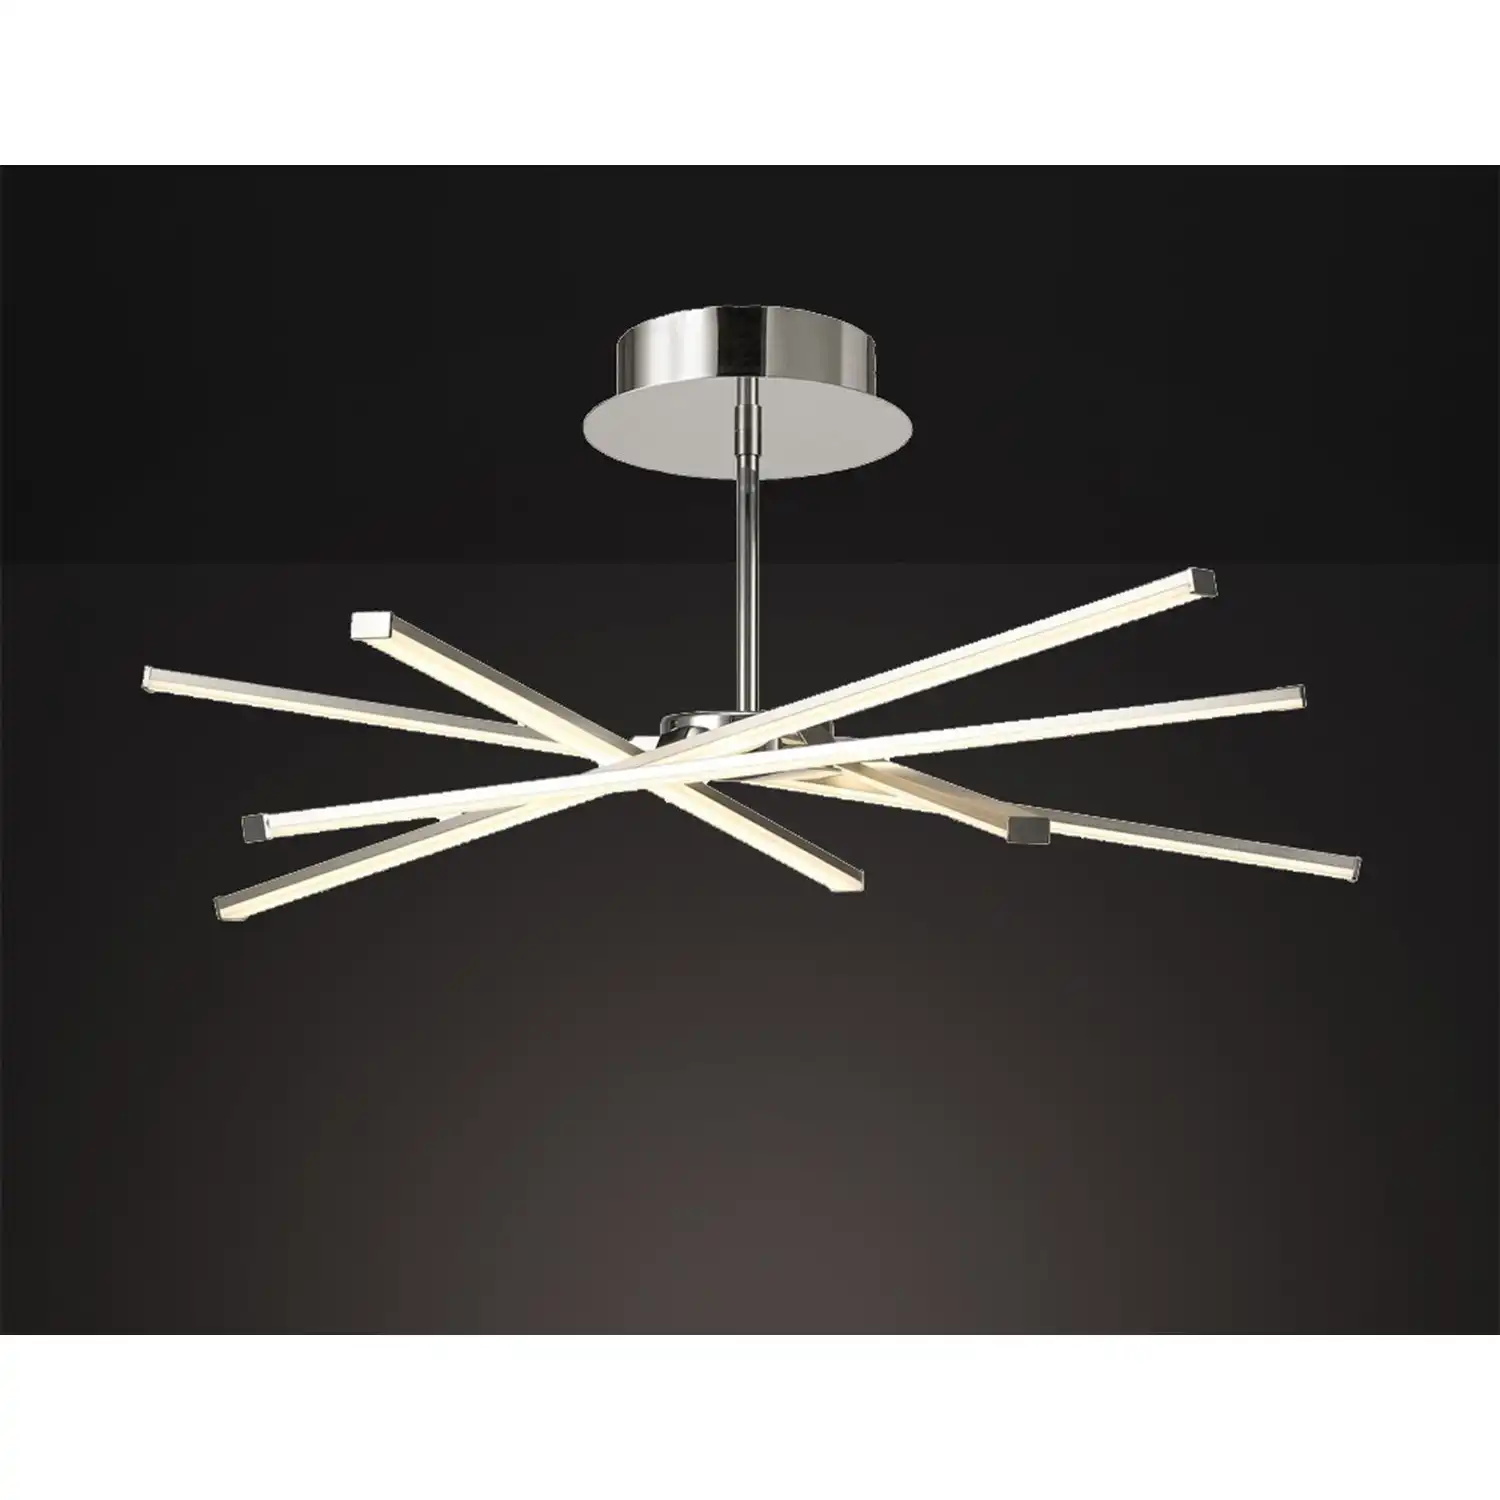 Star LED Ceiling 70.5cm Round 42W 3000K, 3700lm, Dimmable, Silver Frosted Acrylic Polished Chrome, 3yrs Warranty